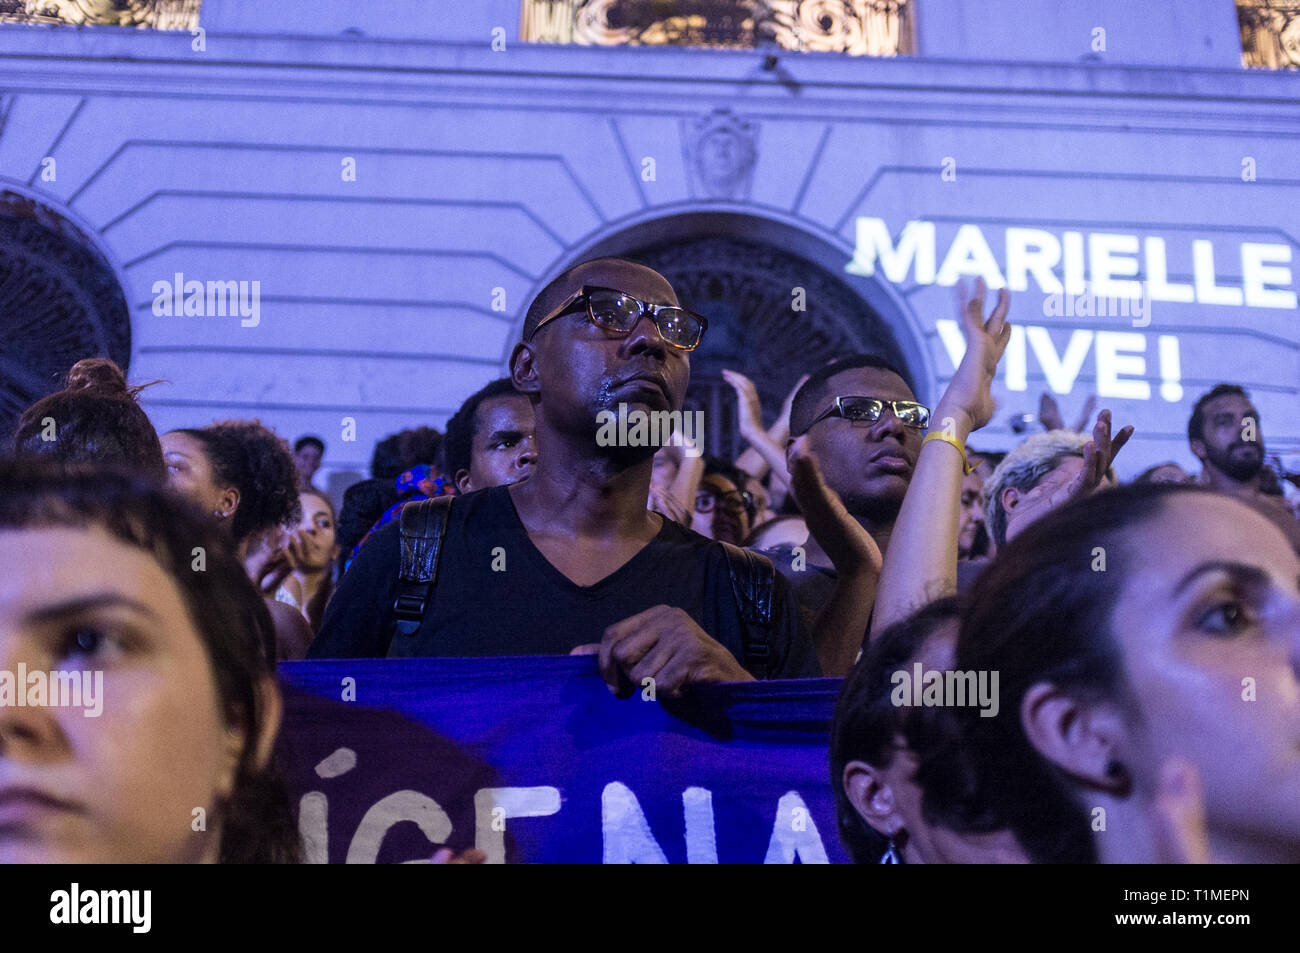 Demonstration for Marielle Franco, Brazilian feminist, politician and human rights activist, murdered on 14 March 2018 in Rio de Janeiro -  she had been an outspoken critic of police brutality and extrajudicial killings. Protestors get emotional, 'Marielle vive' means Marielle is alive, downtown Rio de Janeiro, Brazil. Stock Photo